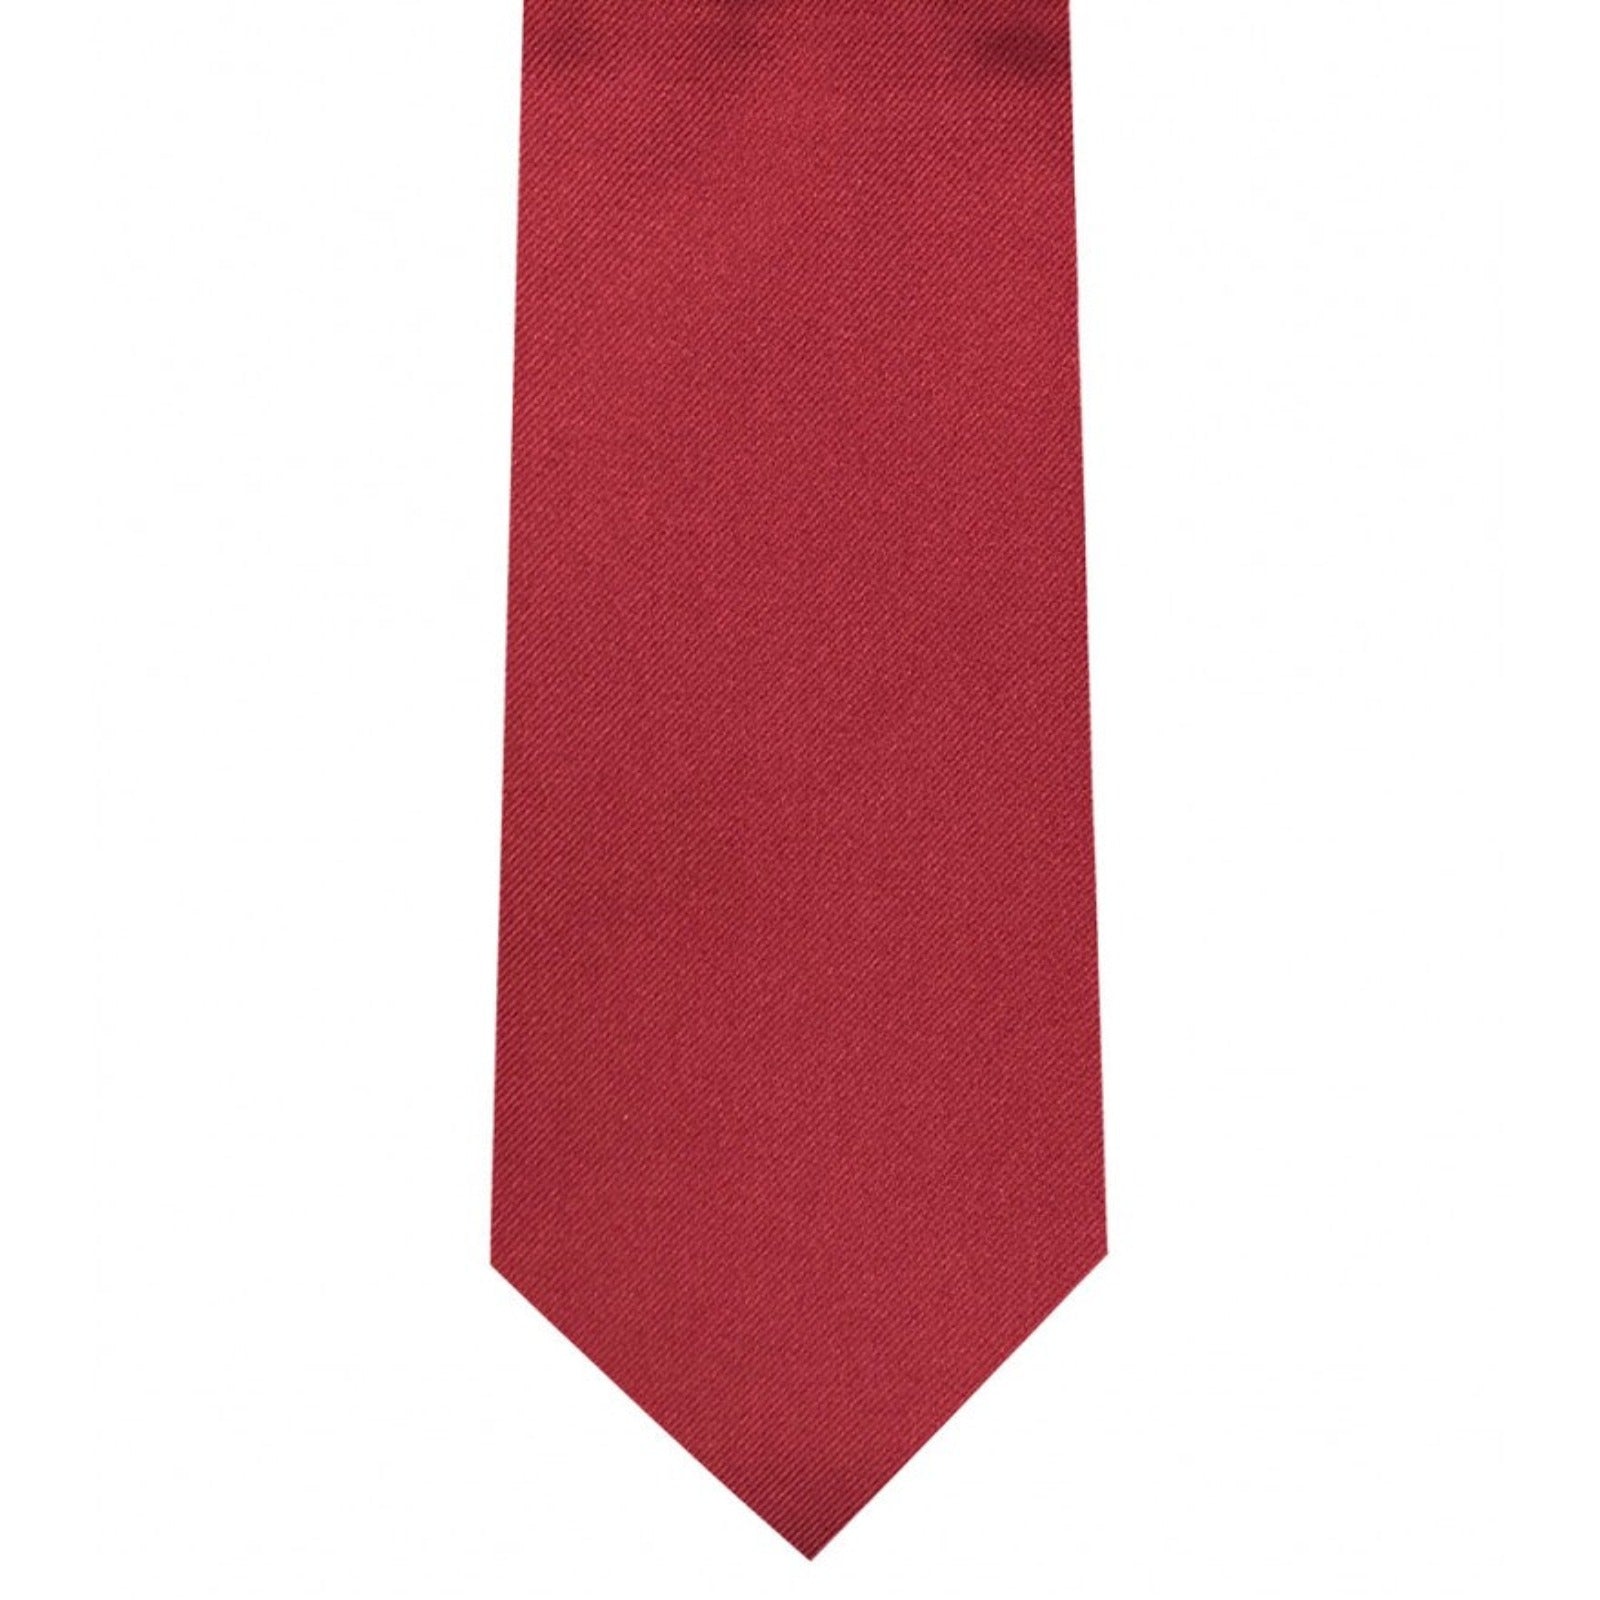 Classic Apple Red Tie Ultra Skinny tie width 2.25 inches With Matching Pocket Square | KCT Menswear